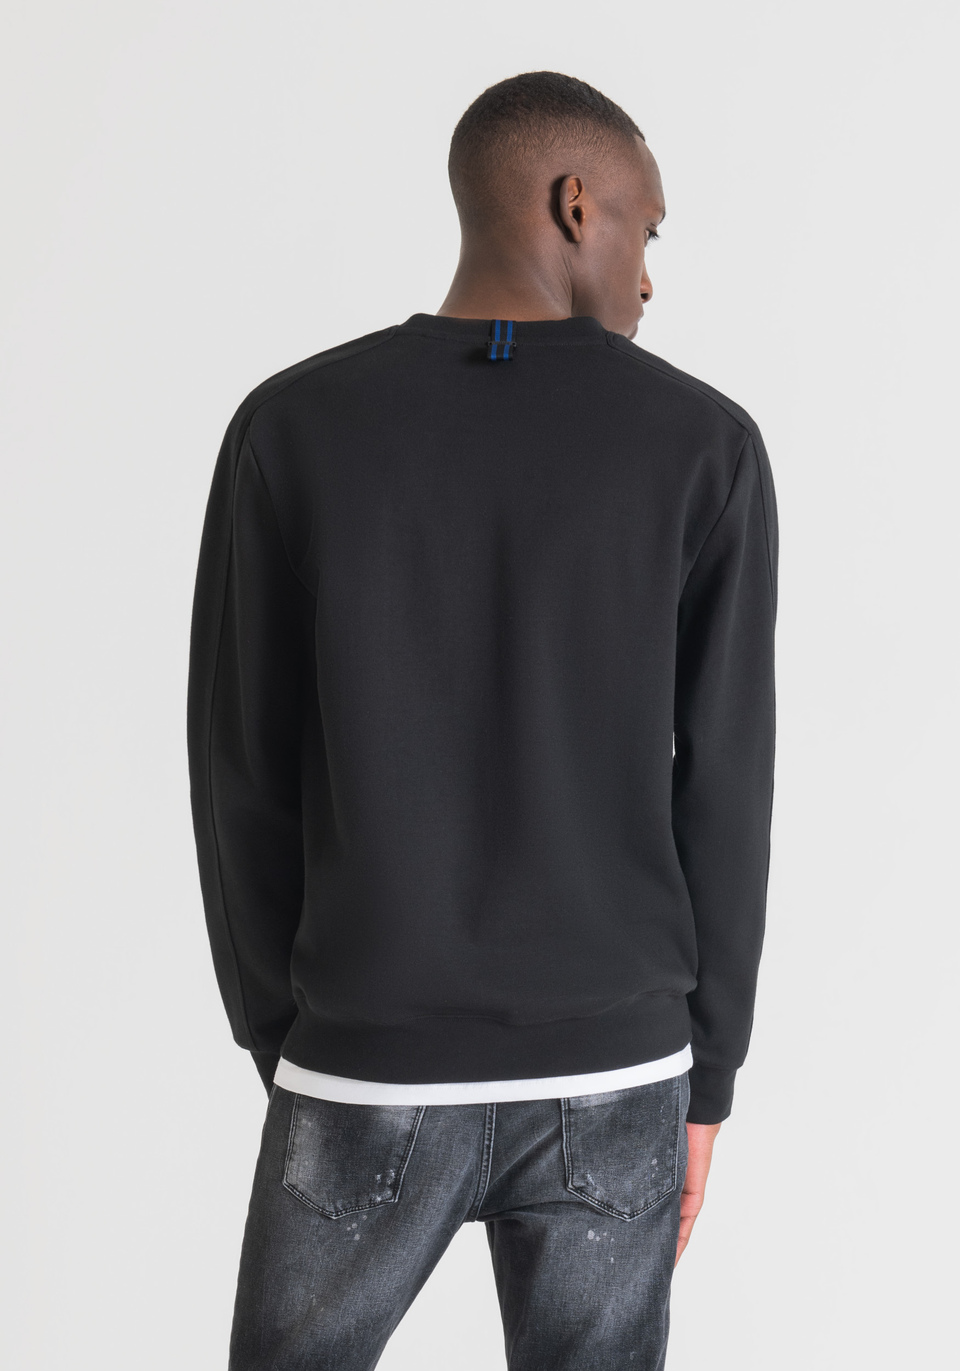 CREW-NECK REGULAR-FIT SWEATSHIRT IN A SOFT FABRIC WITH A LOGO DETAIL - Antony Morato Online Shop